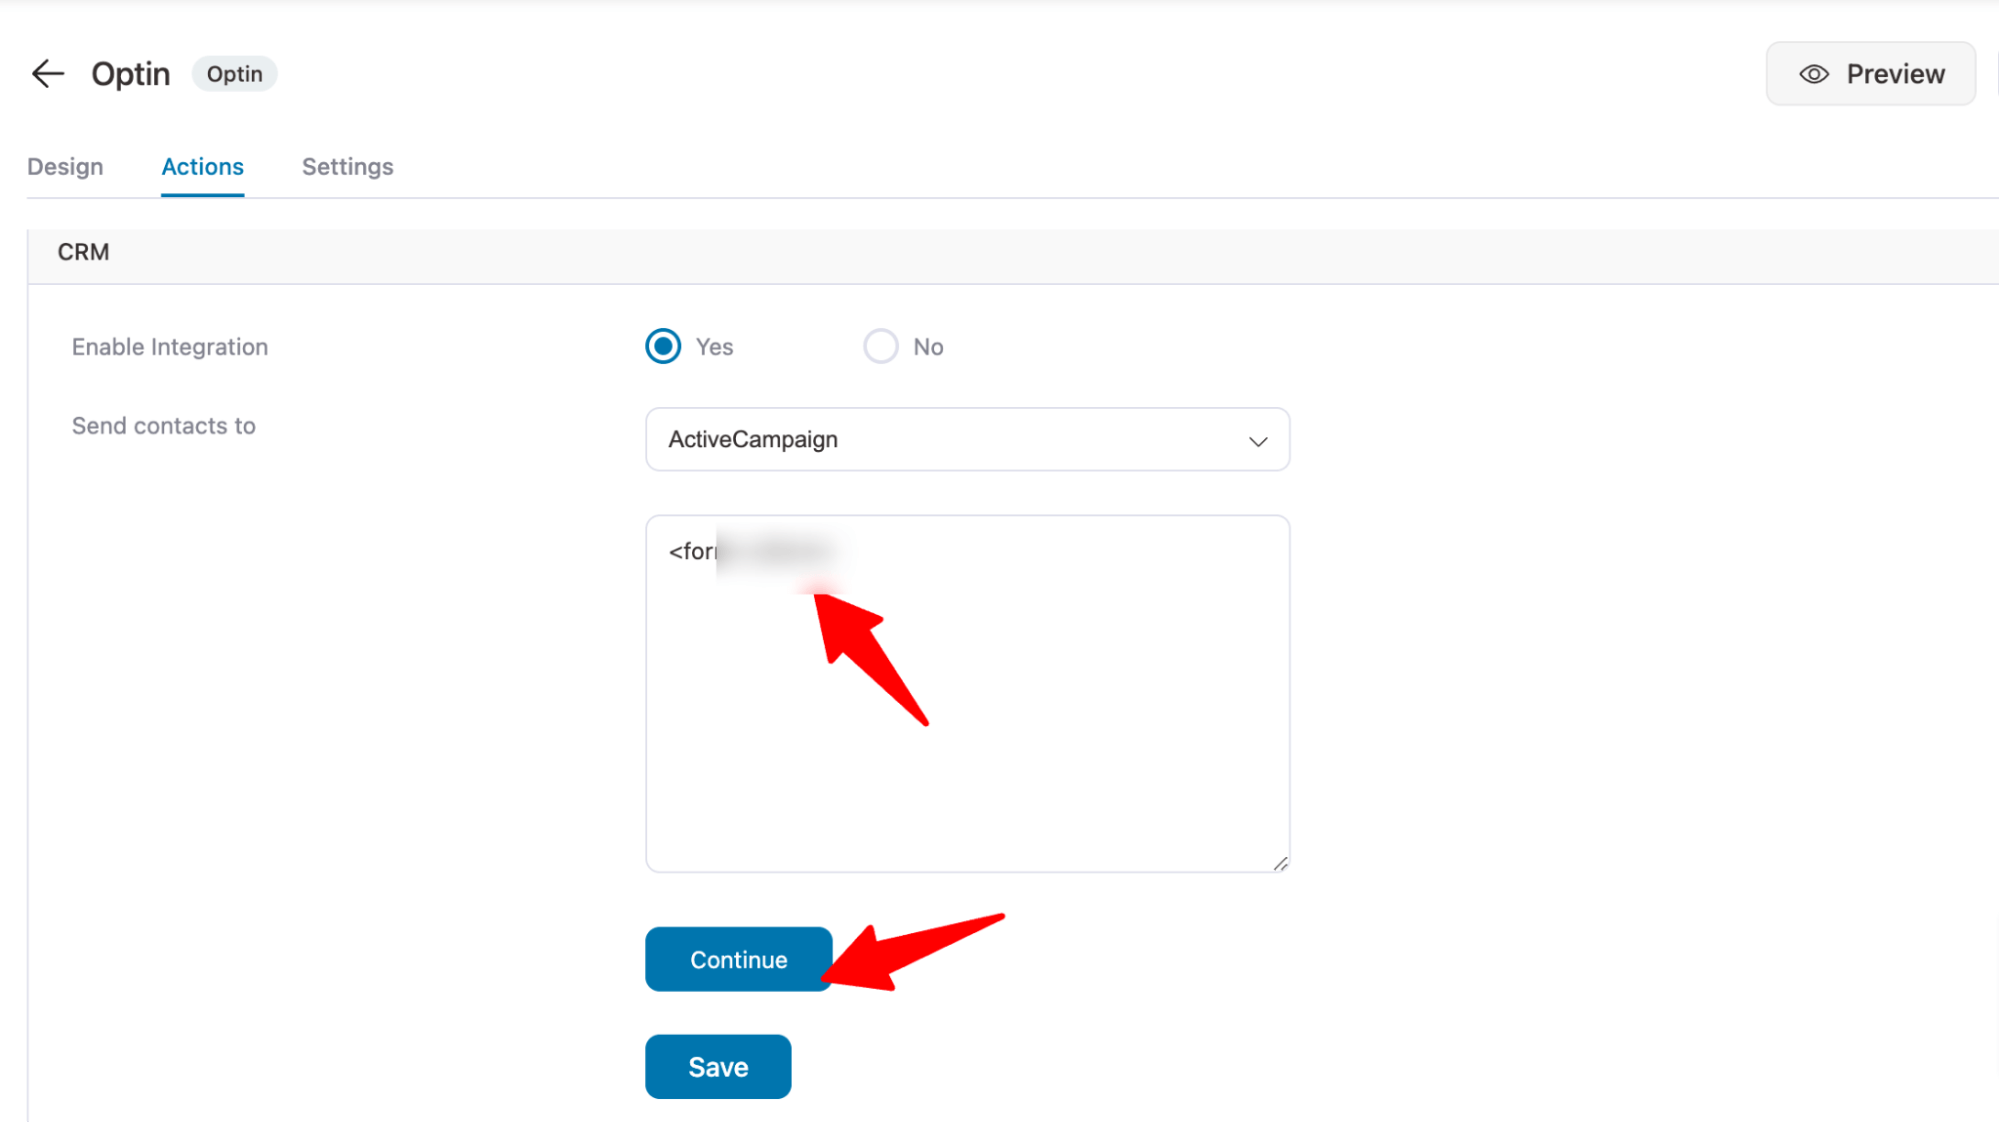 add form to send contacts